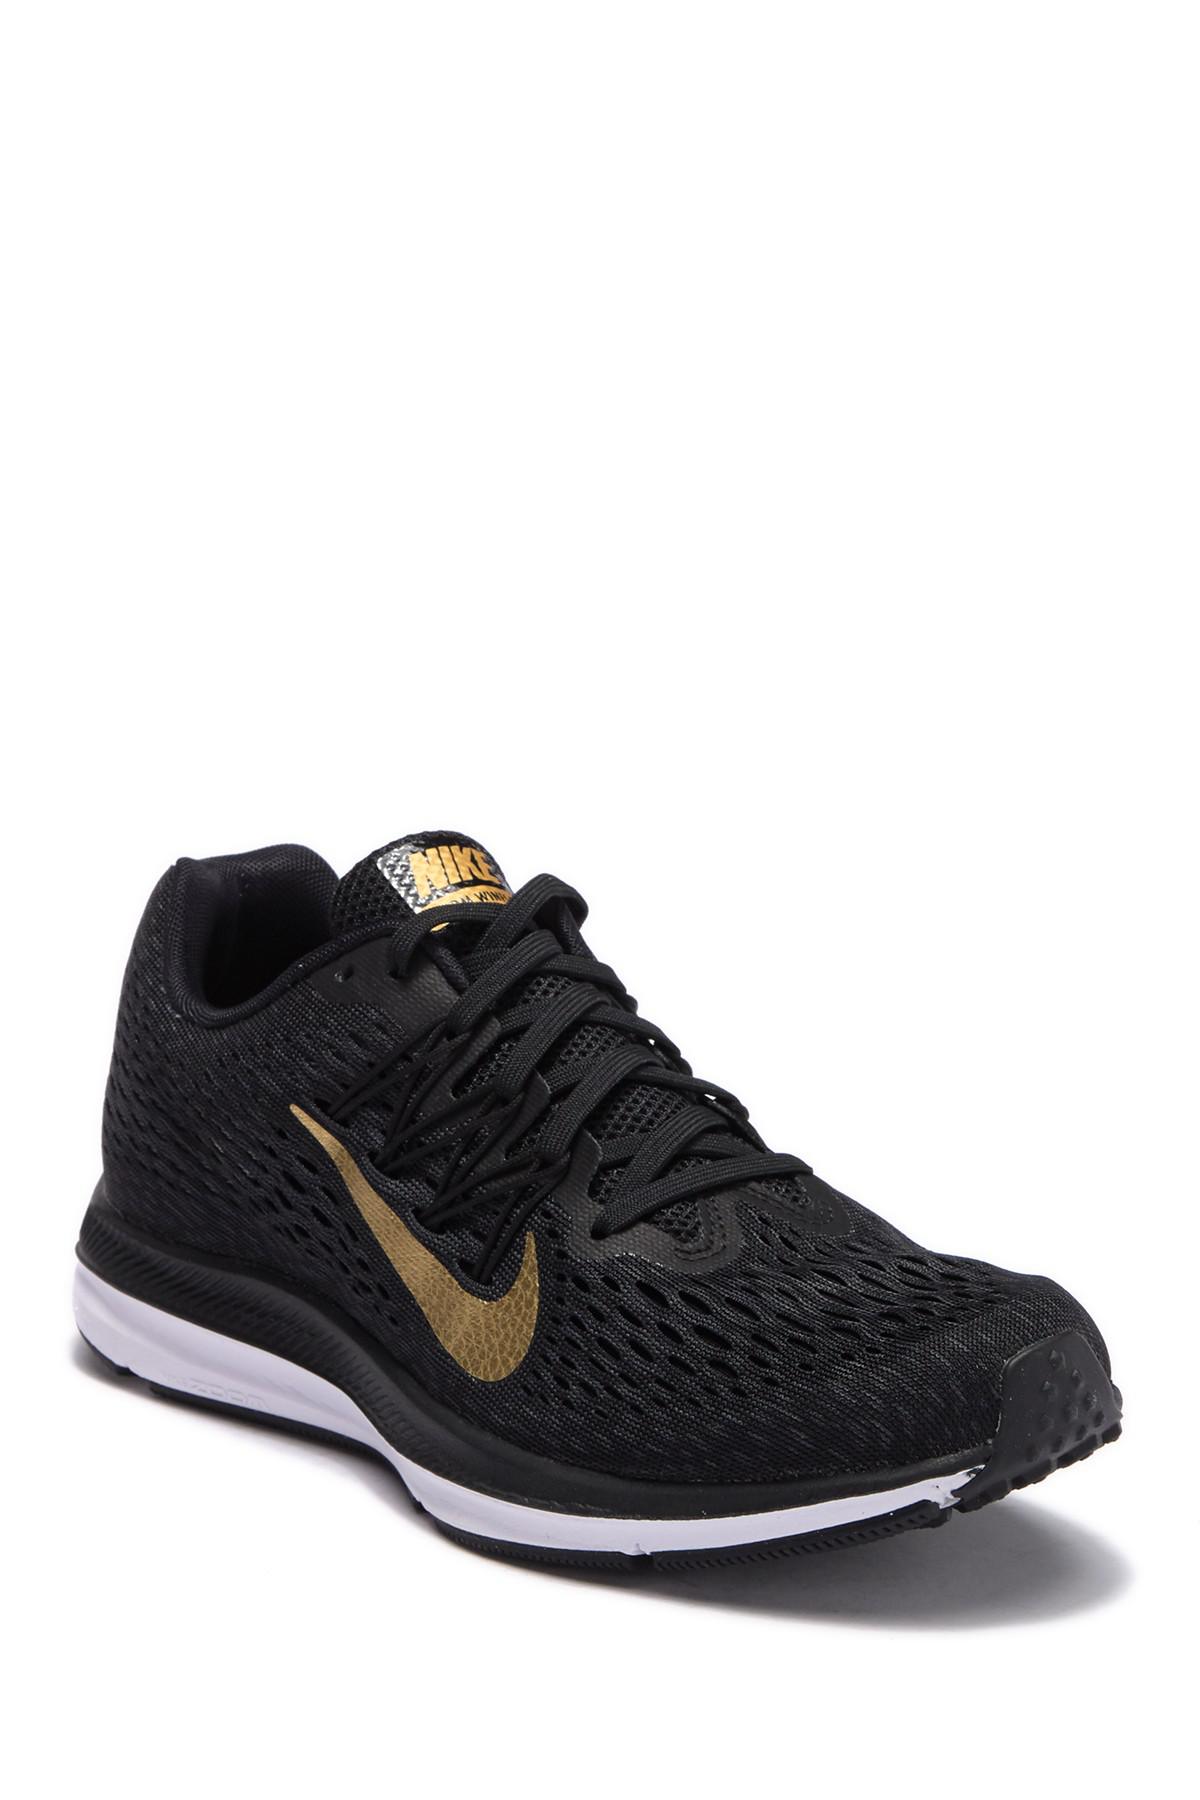 Nike Zoom Winflo 5 Running Shoes in Black - Lyst